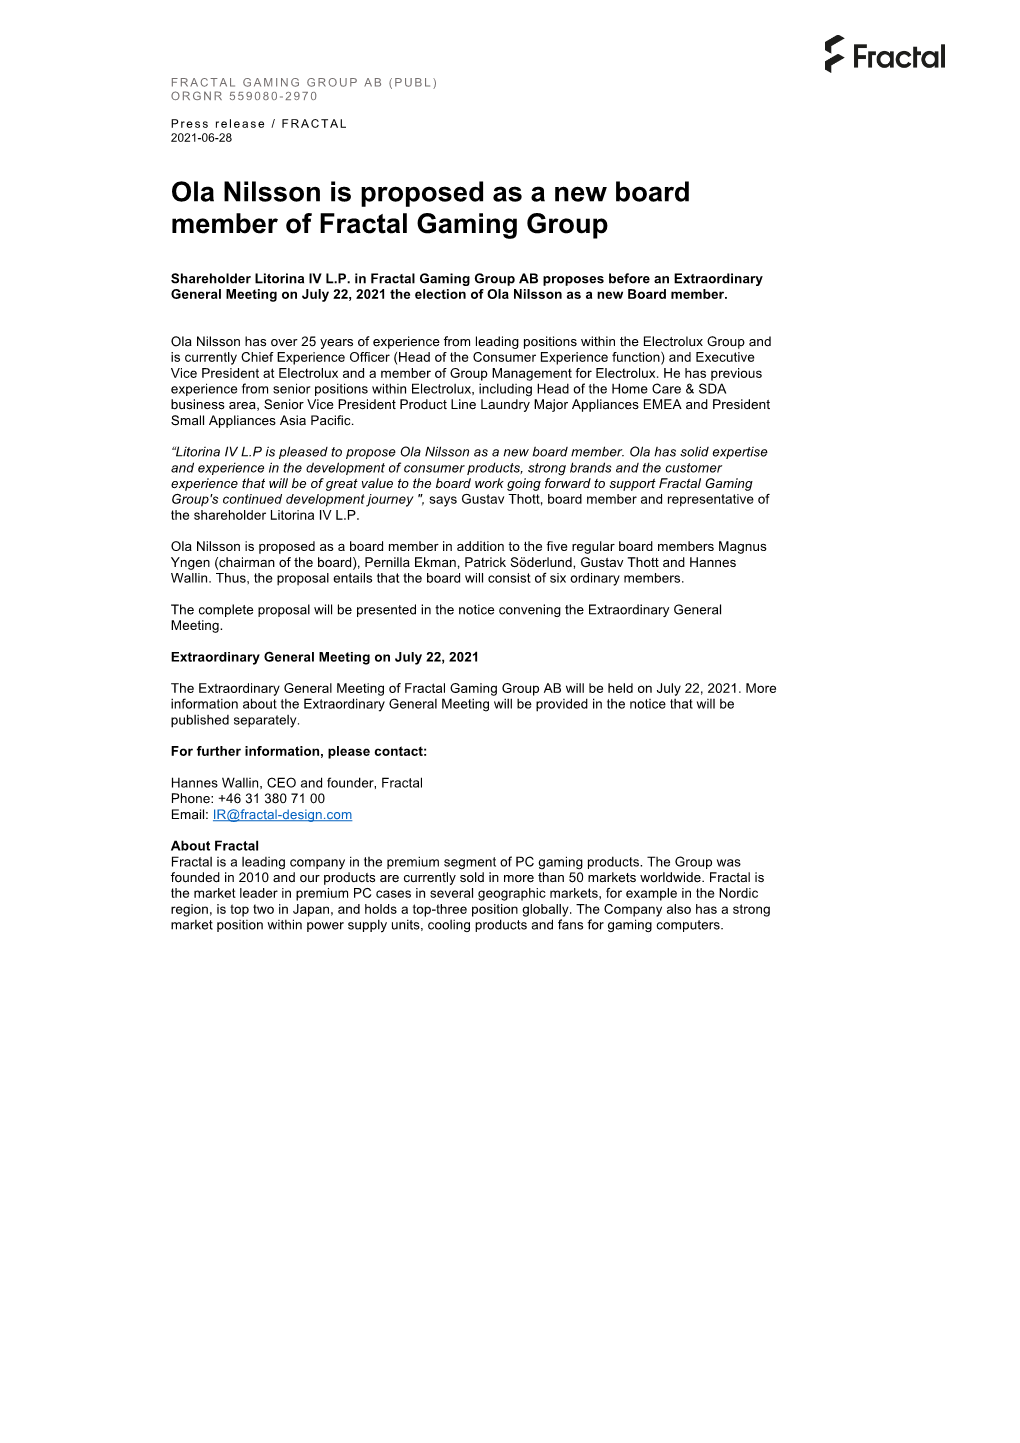 Ola Nilsson Is Proposed As a New Board Member of Fractal Gaming Group